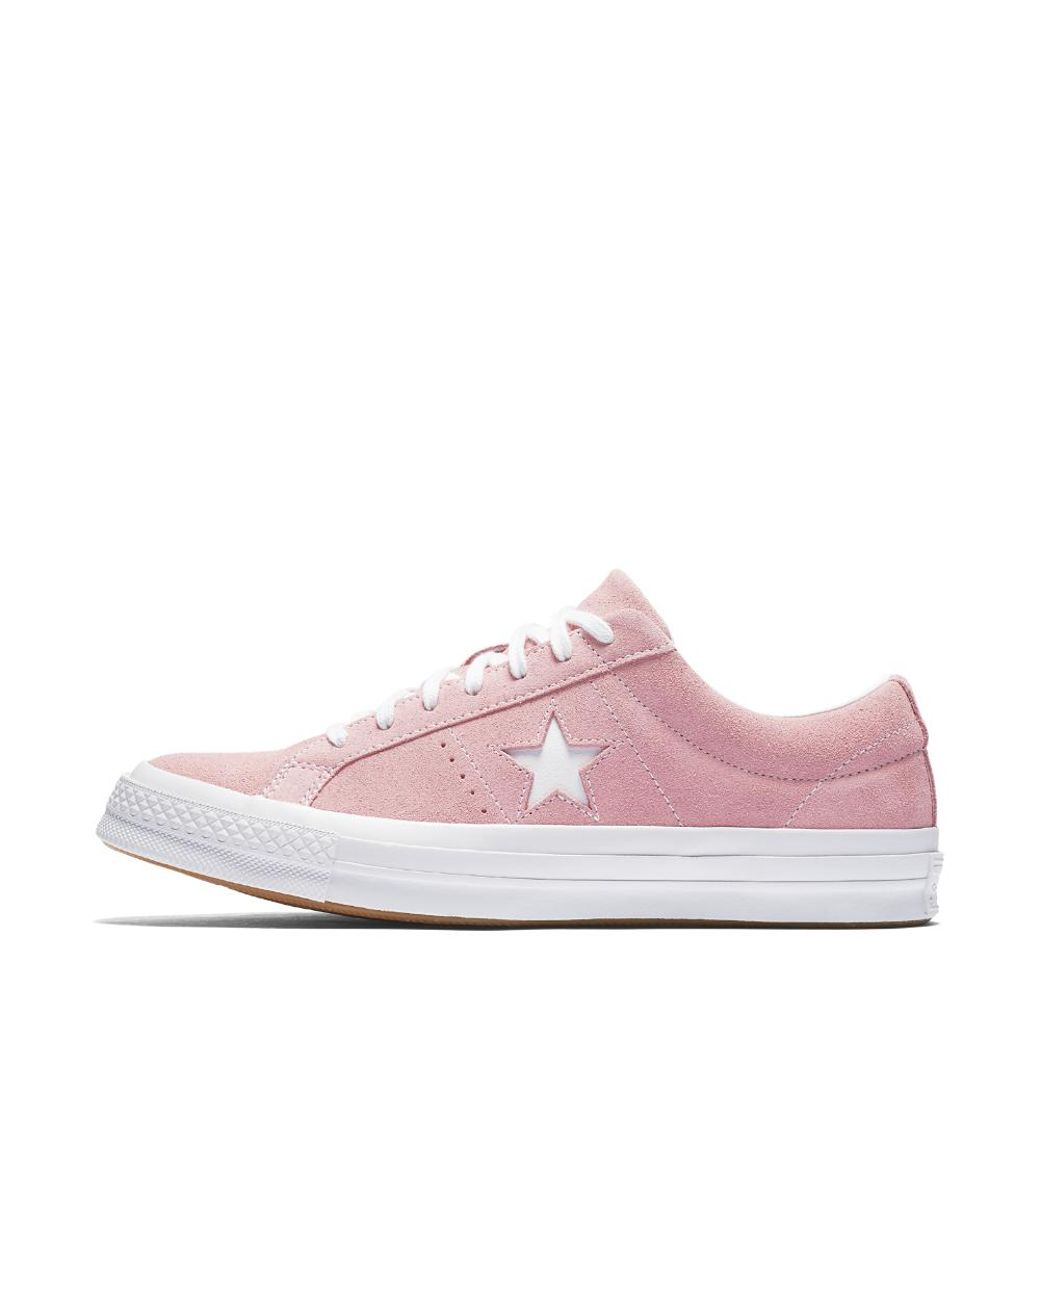 Converse One Star Classic Suede Low Top Shoe in Pink | Lyst